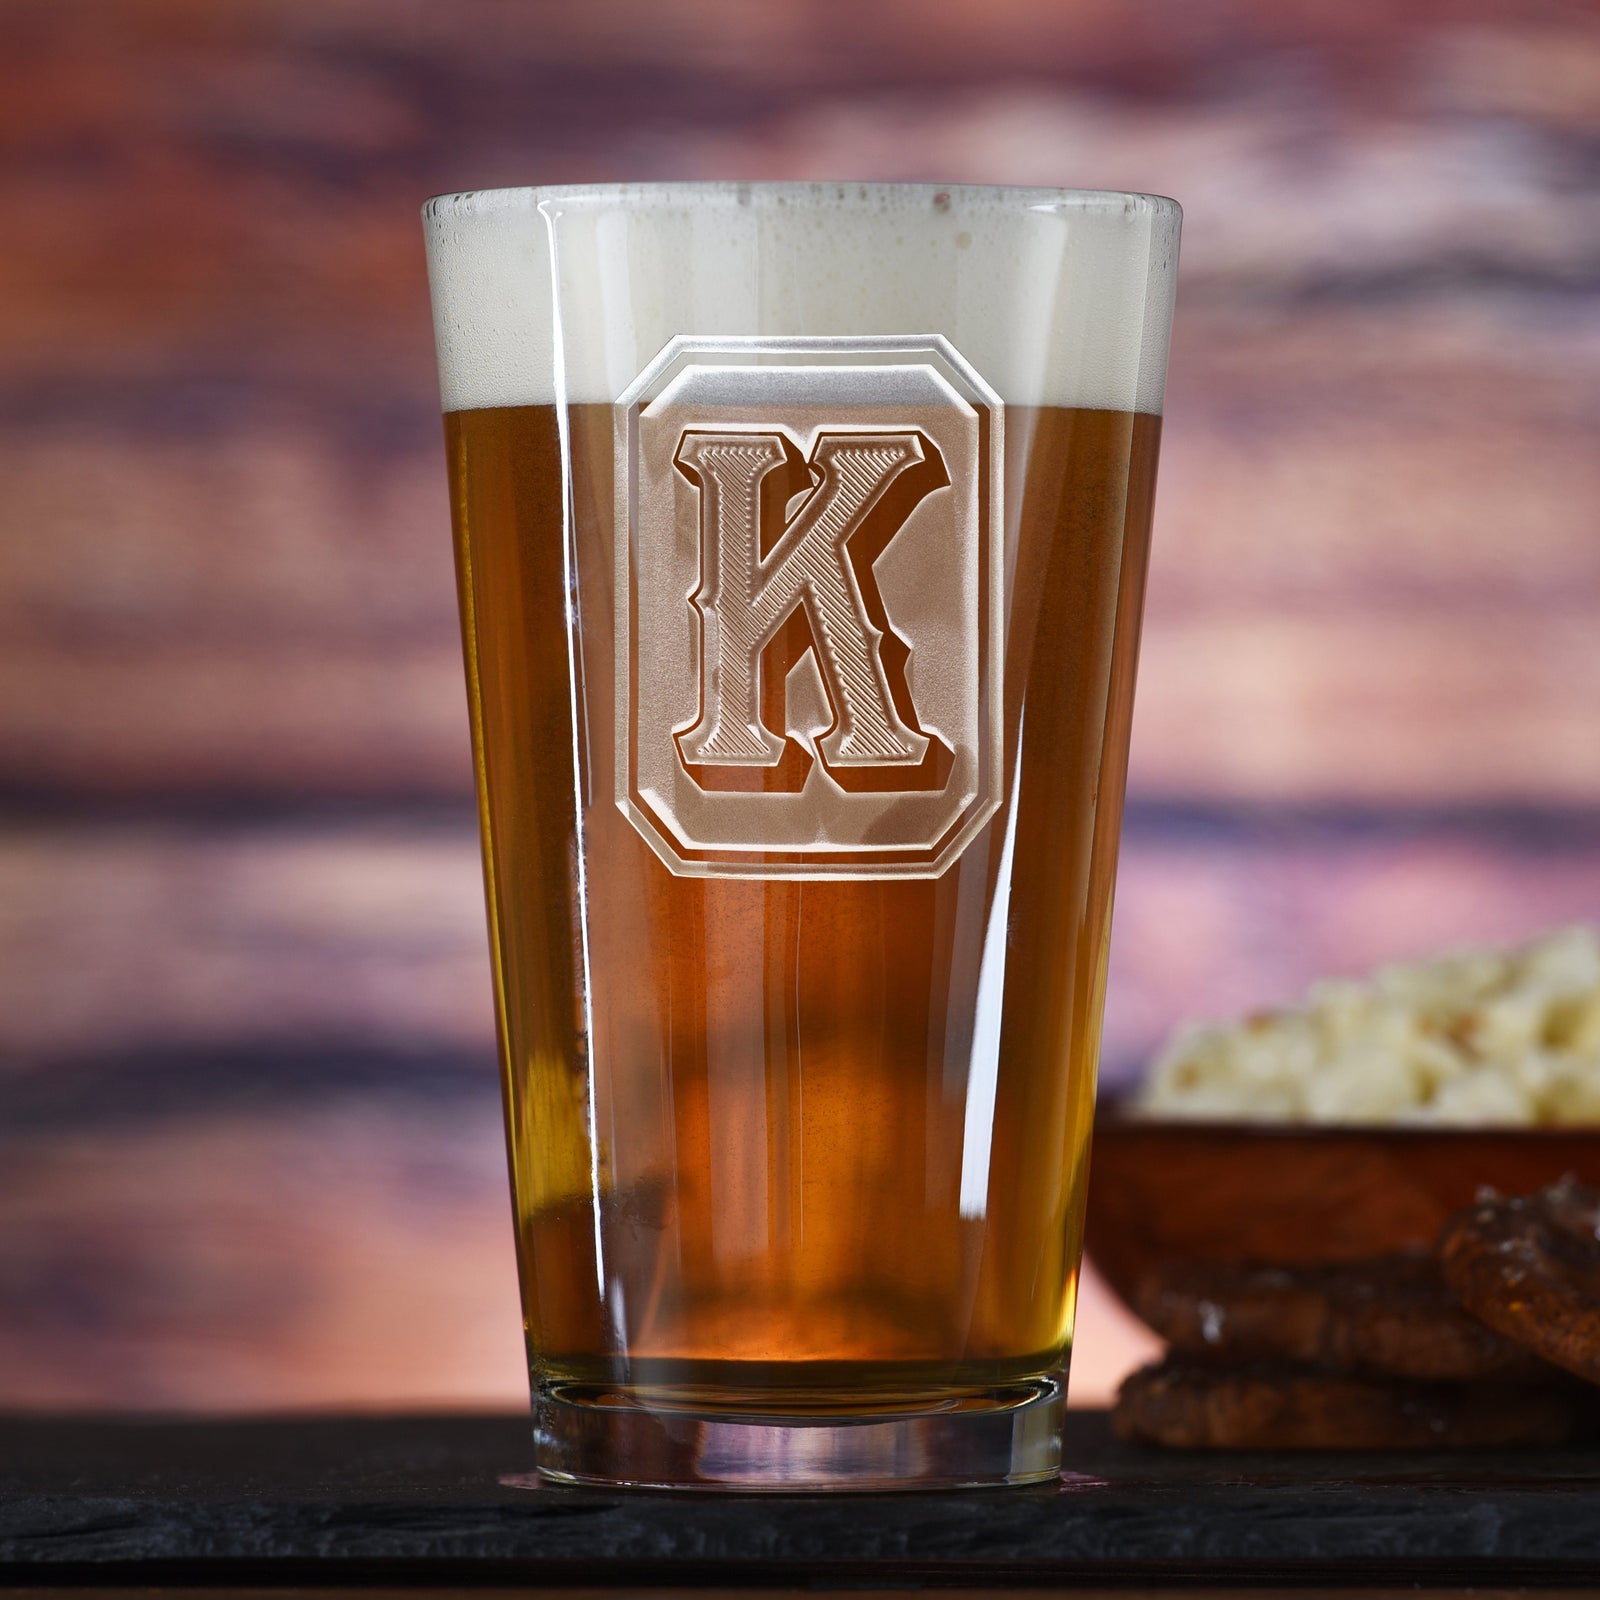 Monogram Engraved Pint Pub Beer Glass - Crystal Imagery pint glass